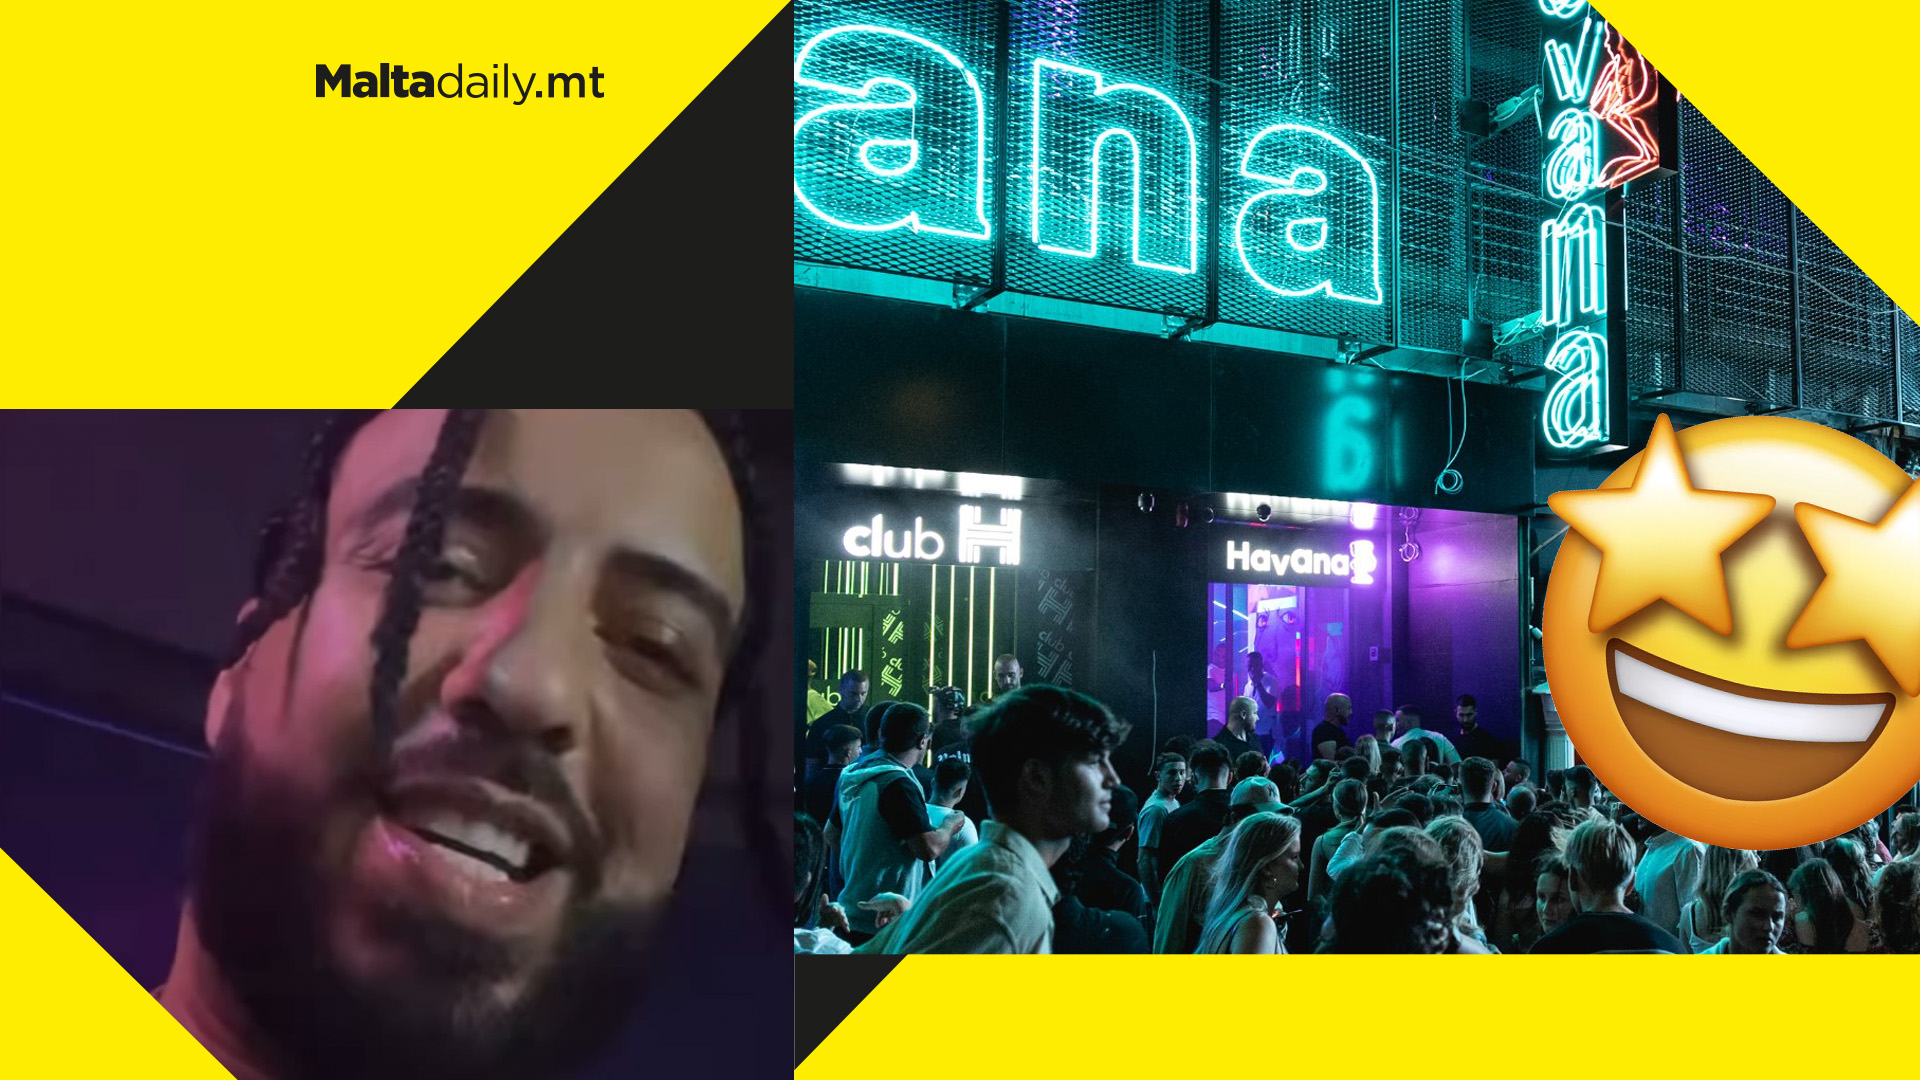 WATCH: French Montana spotted at Havana Club Malta